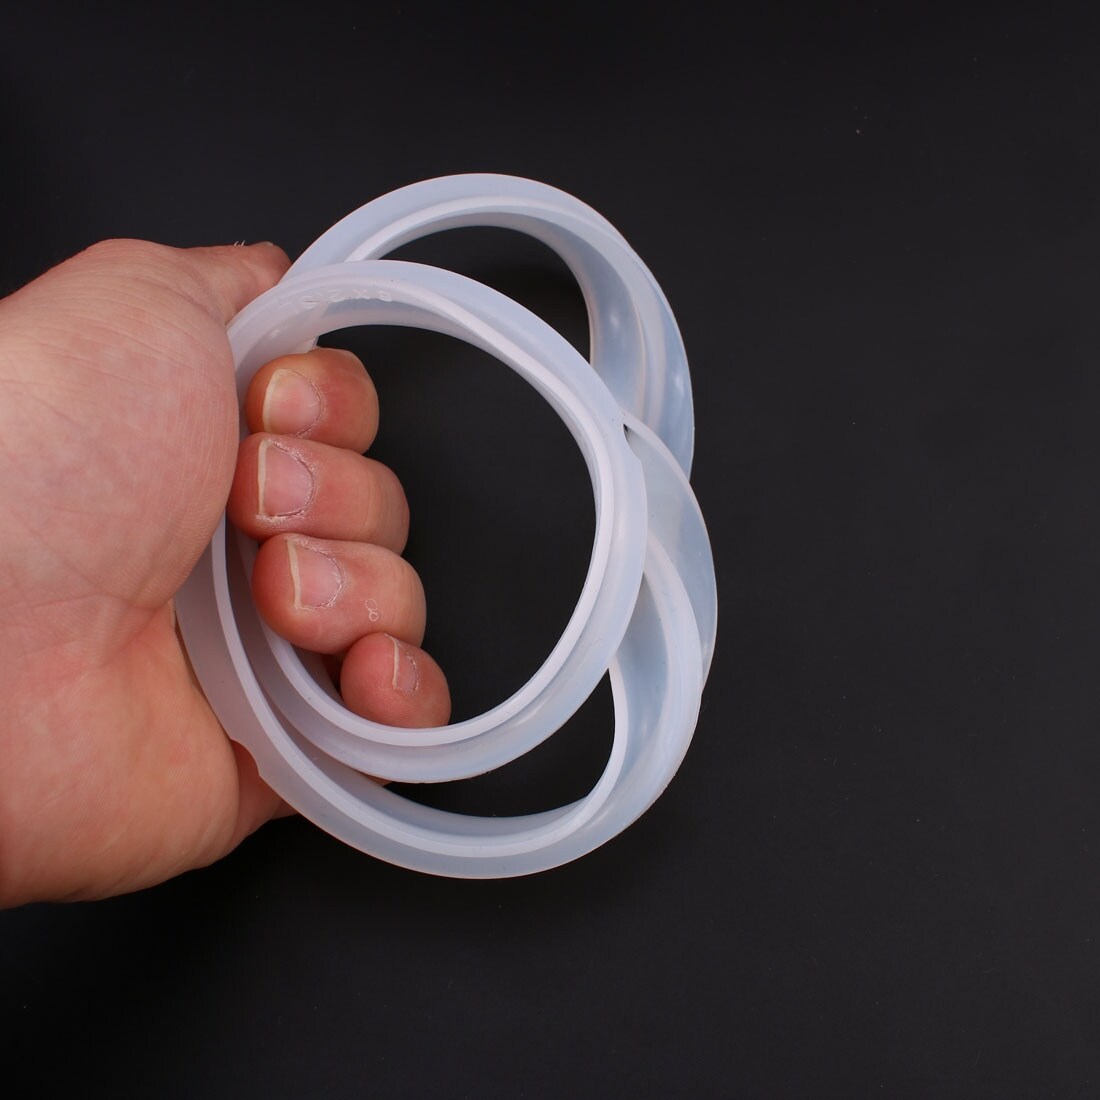 https://ak1.ostkcdn.com/images/products/is/images/direct/dd7060b2d4597fd74d475db3c0dcc2e61fa3a43a/Silicone-Gasket-Sealing-Ring-w-Accessory-Inner-Dia-6.3%22-2.5-QT-Models.jpg